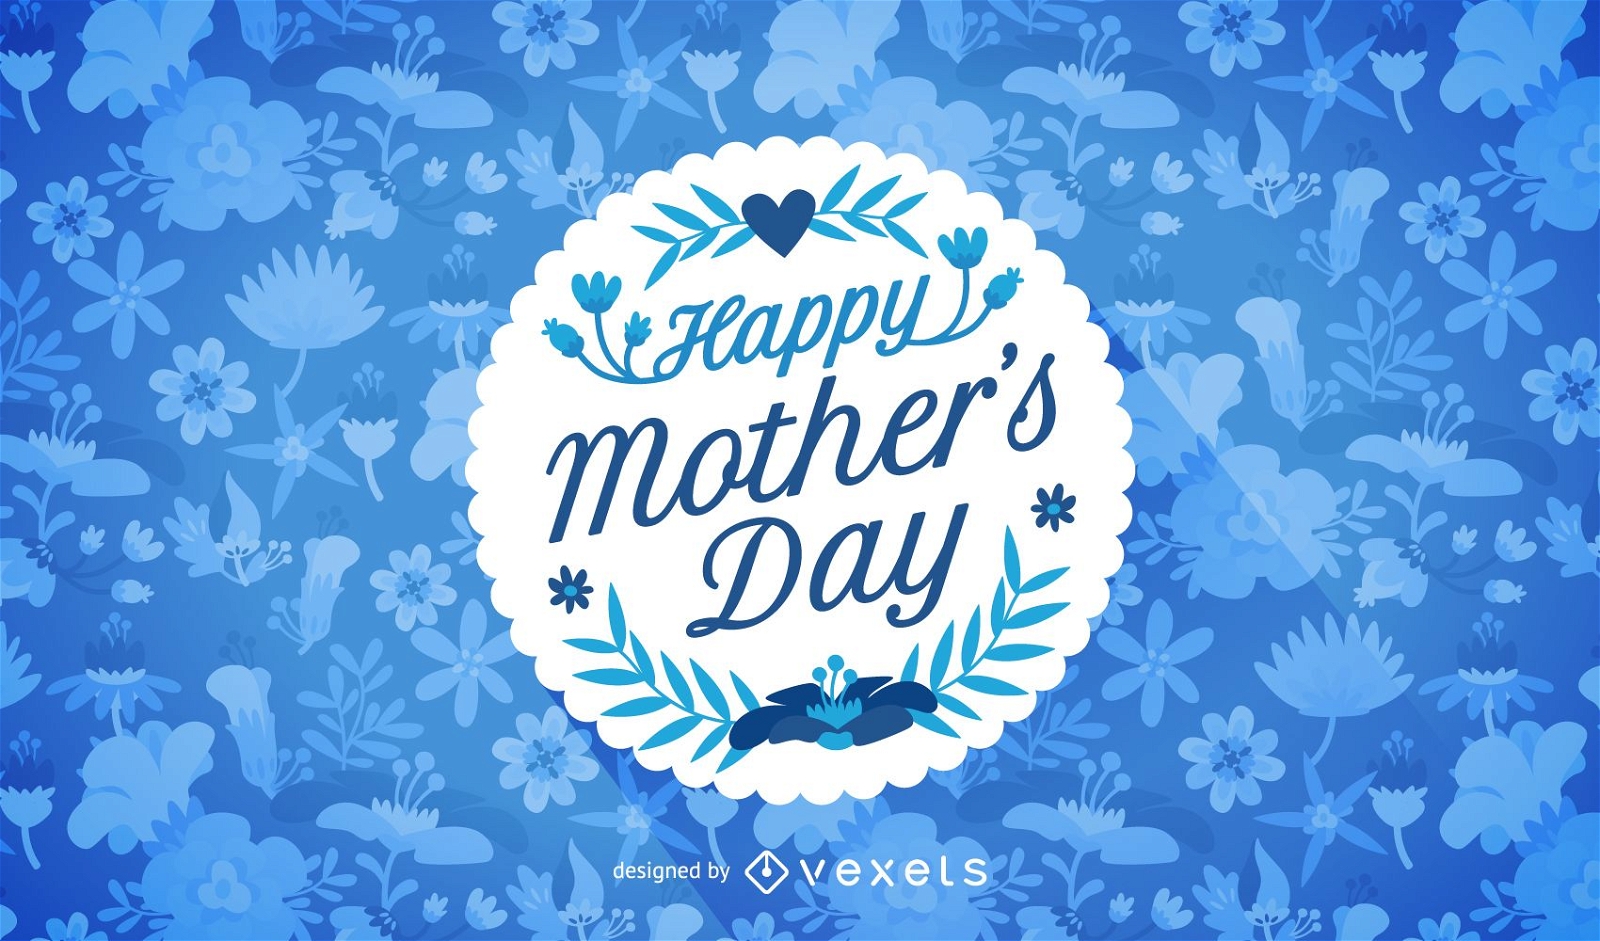 Download Happy Mother's Day design with badge - Vector download